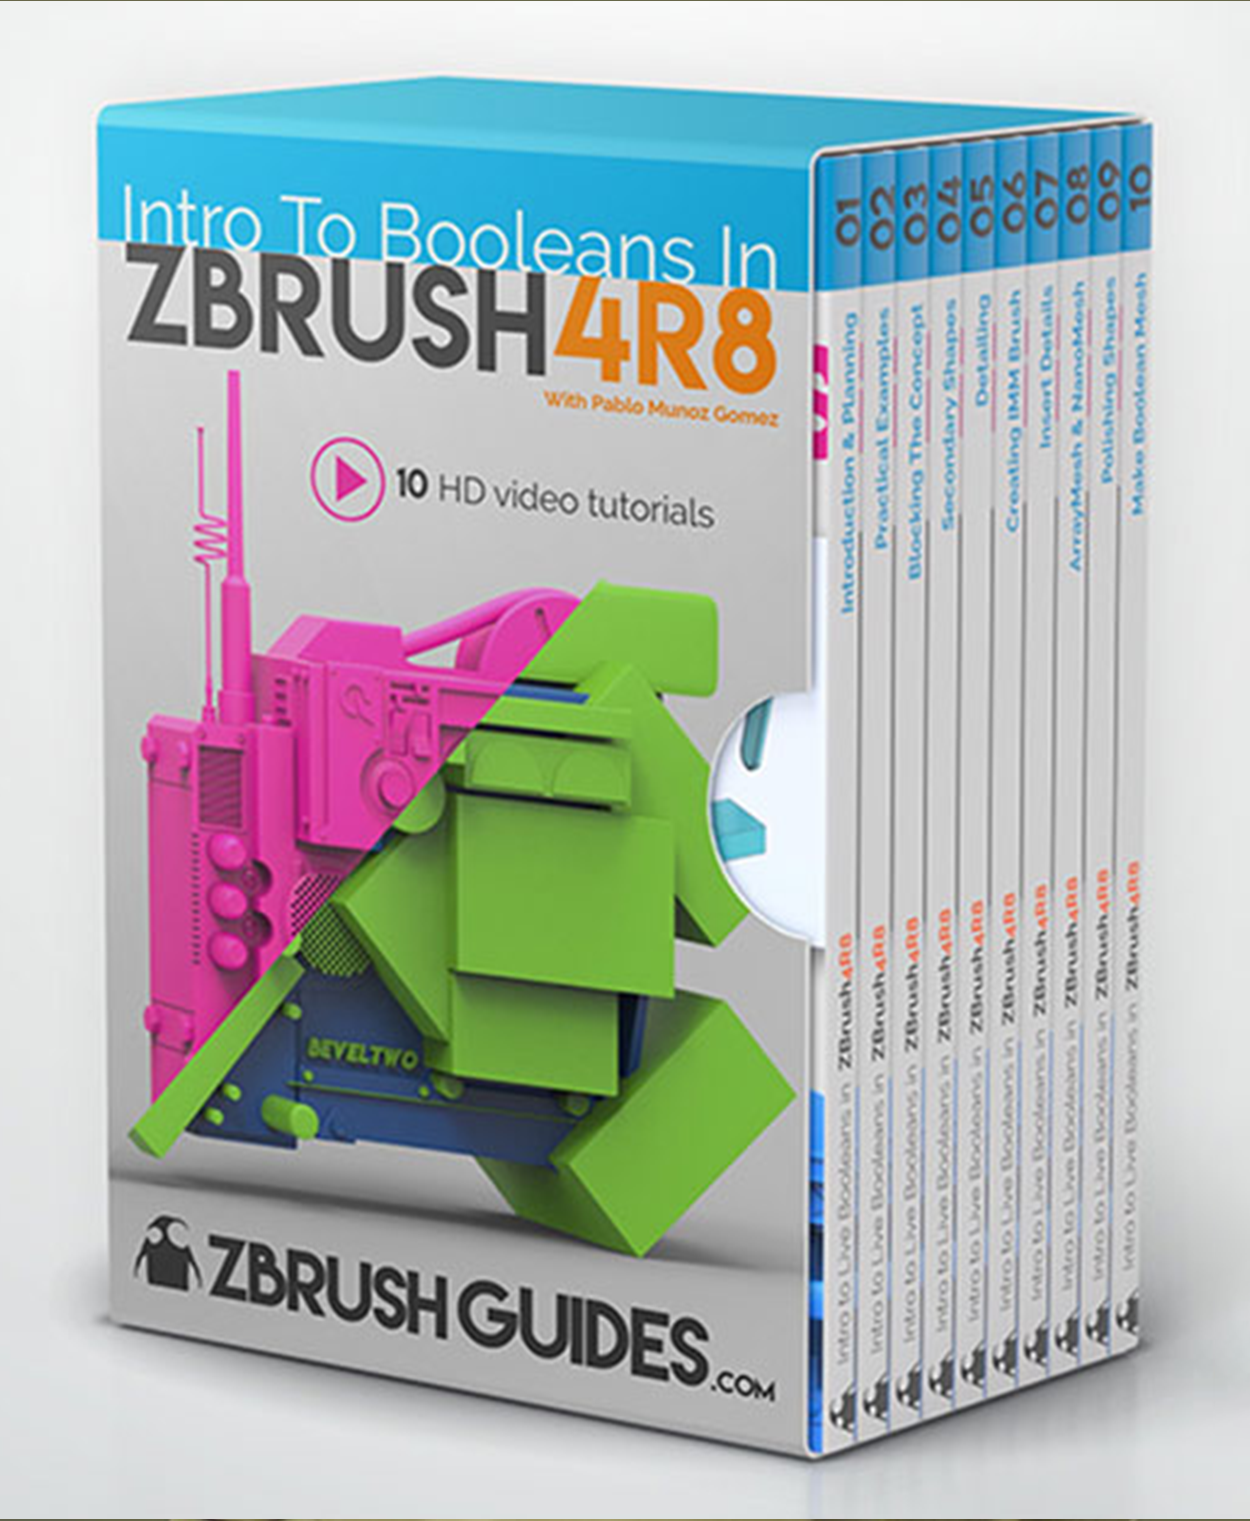 Intro to Booleans in ZBrush 4R8